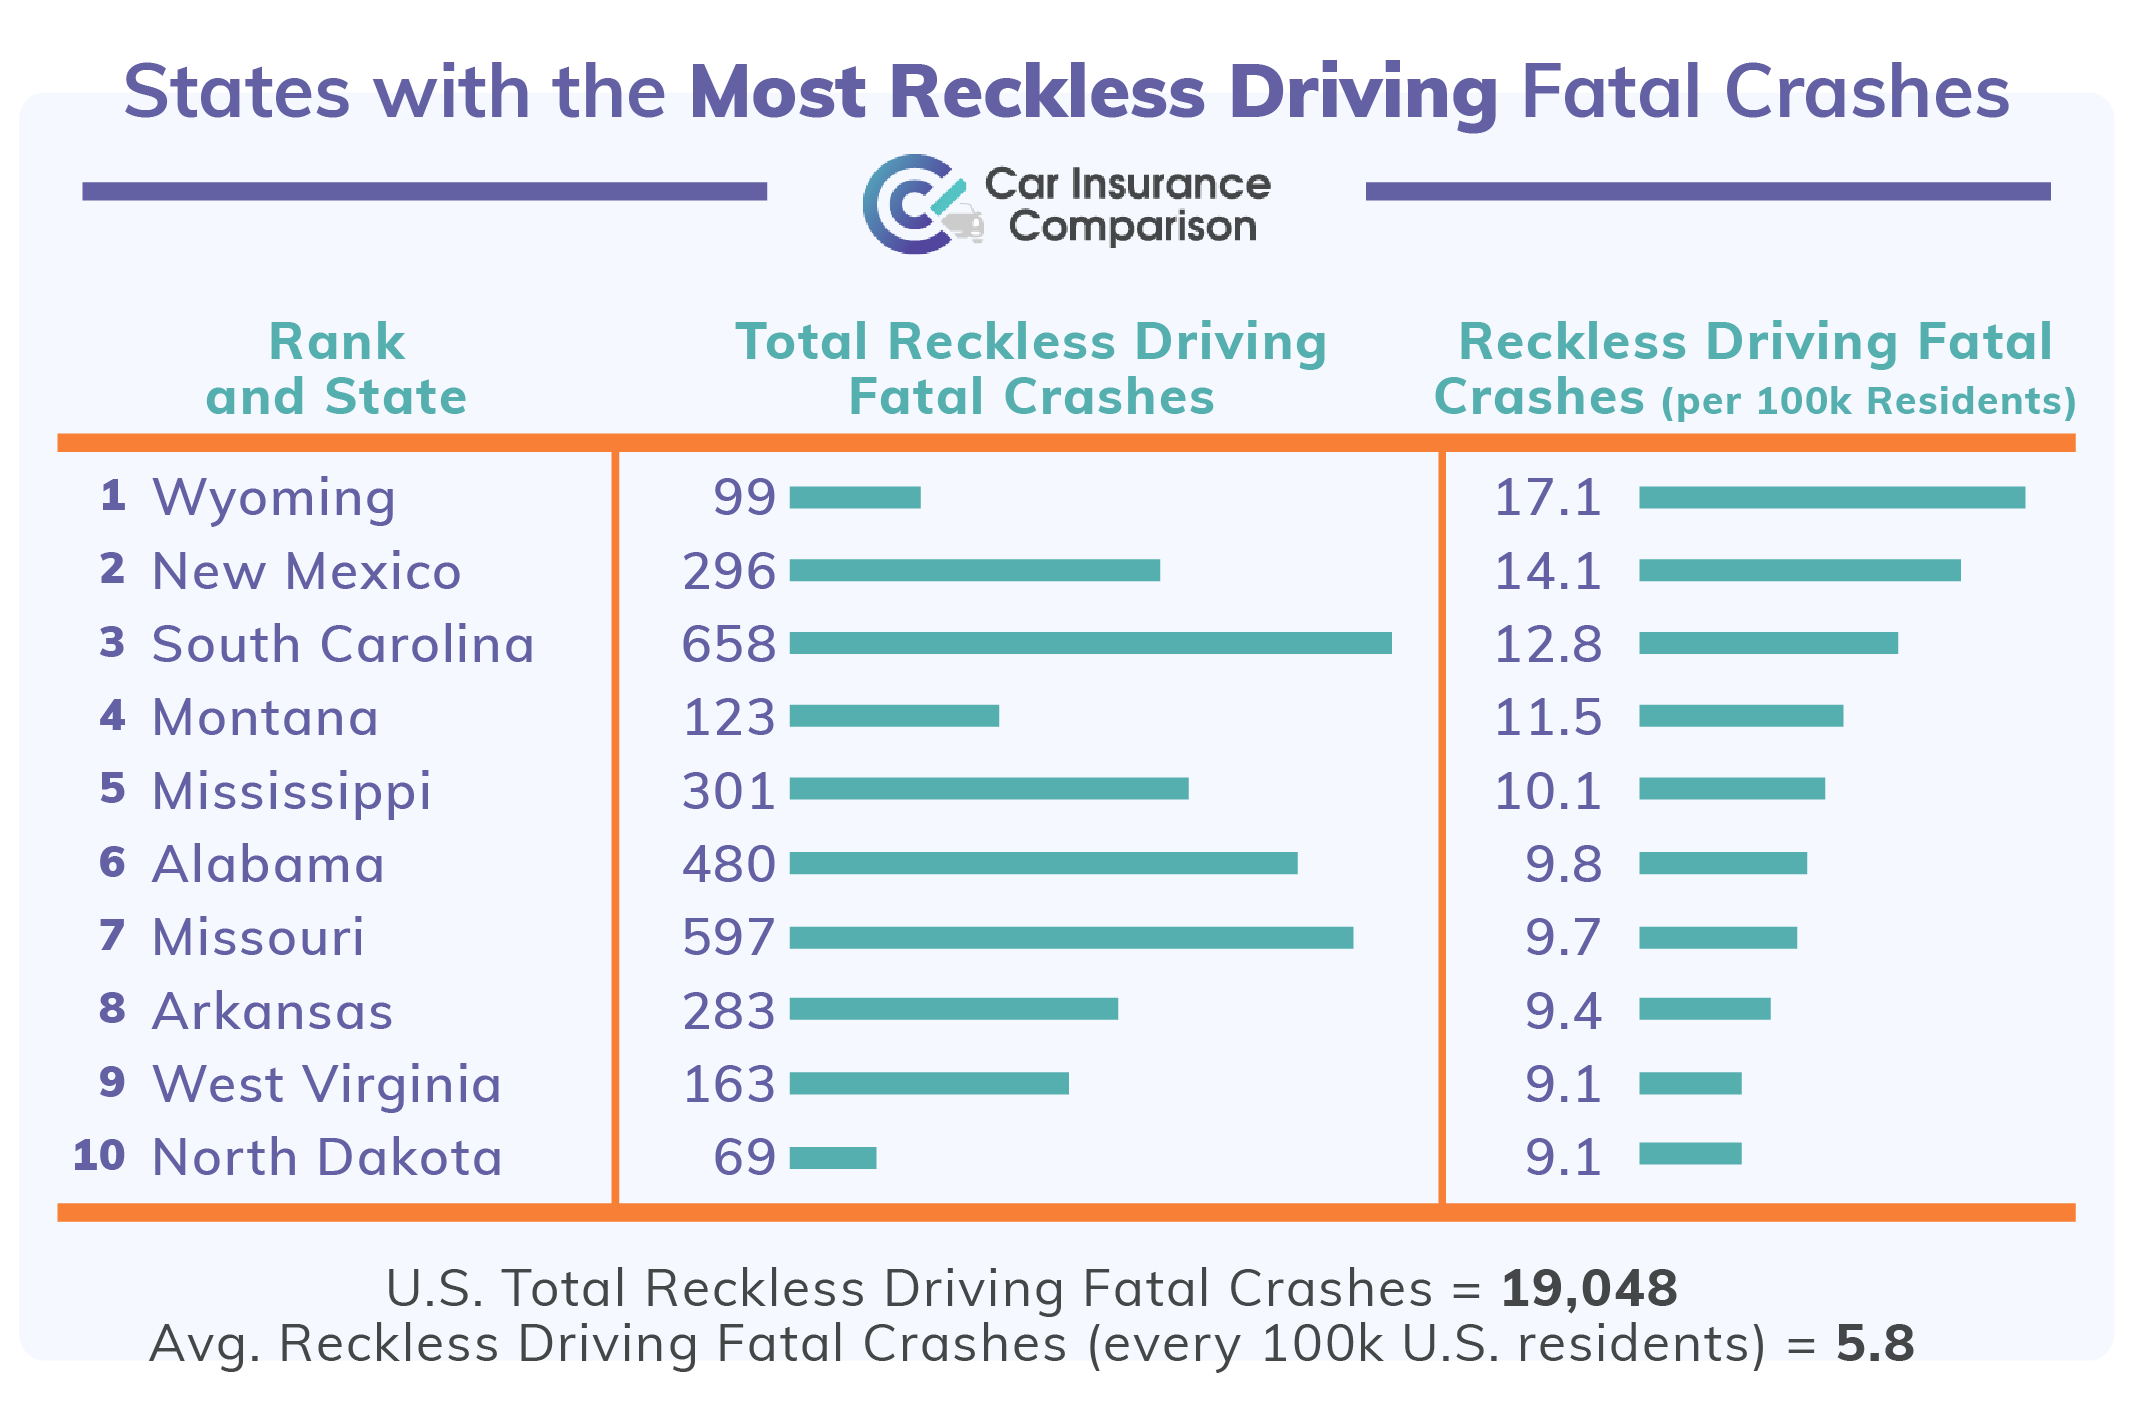 States with the Most Reckless Driving Fatal Crashes